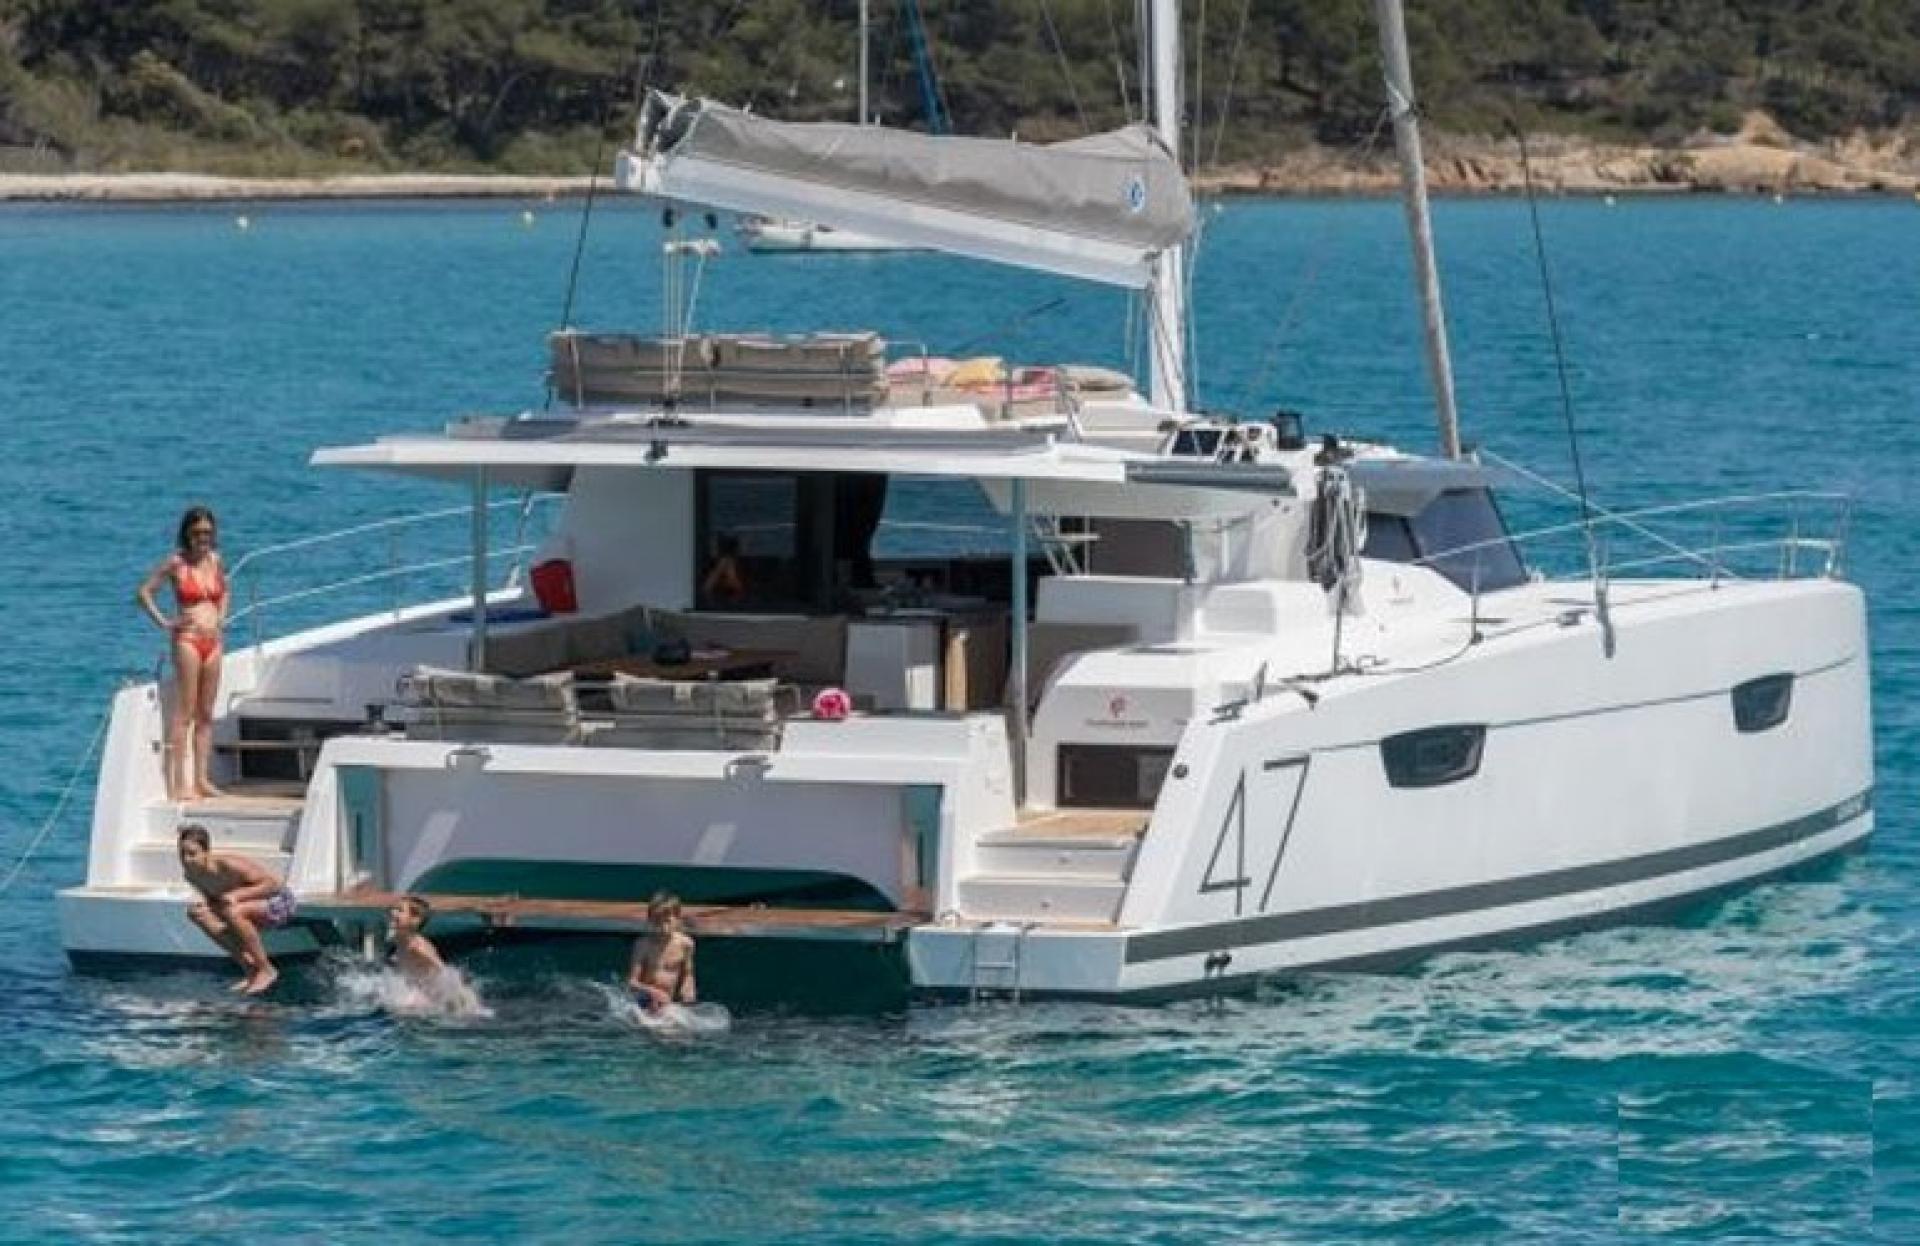 Fountaine Pajot extra luxury catamaran in the crystal clear turquoise waters of La Maddalena